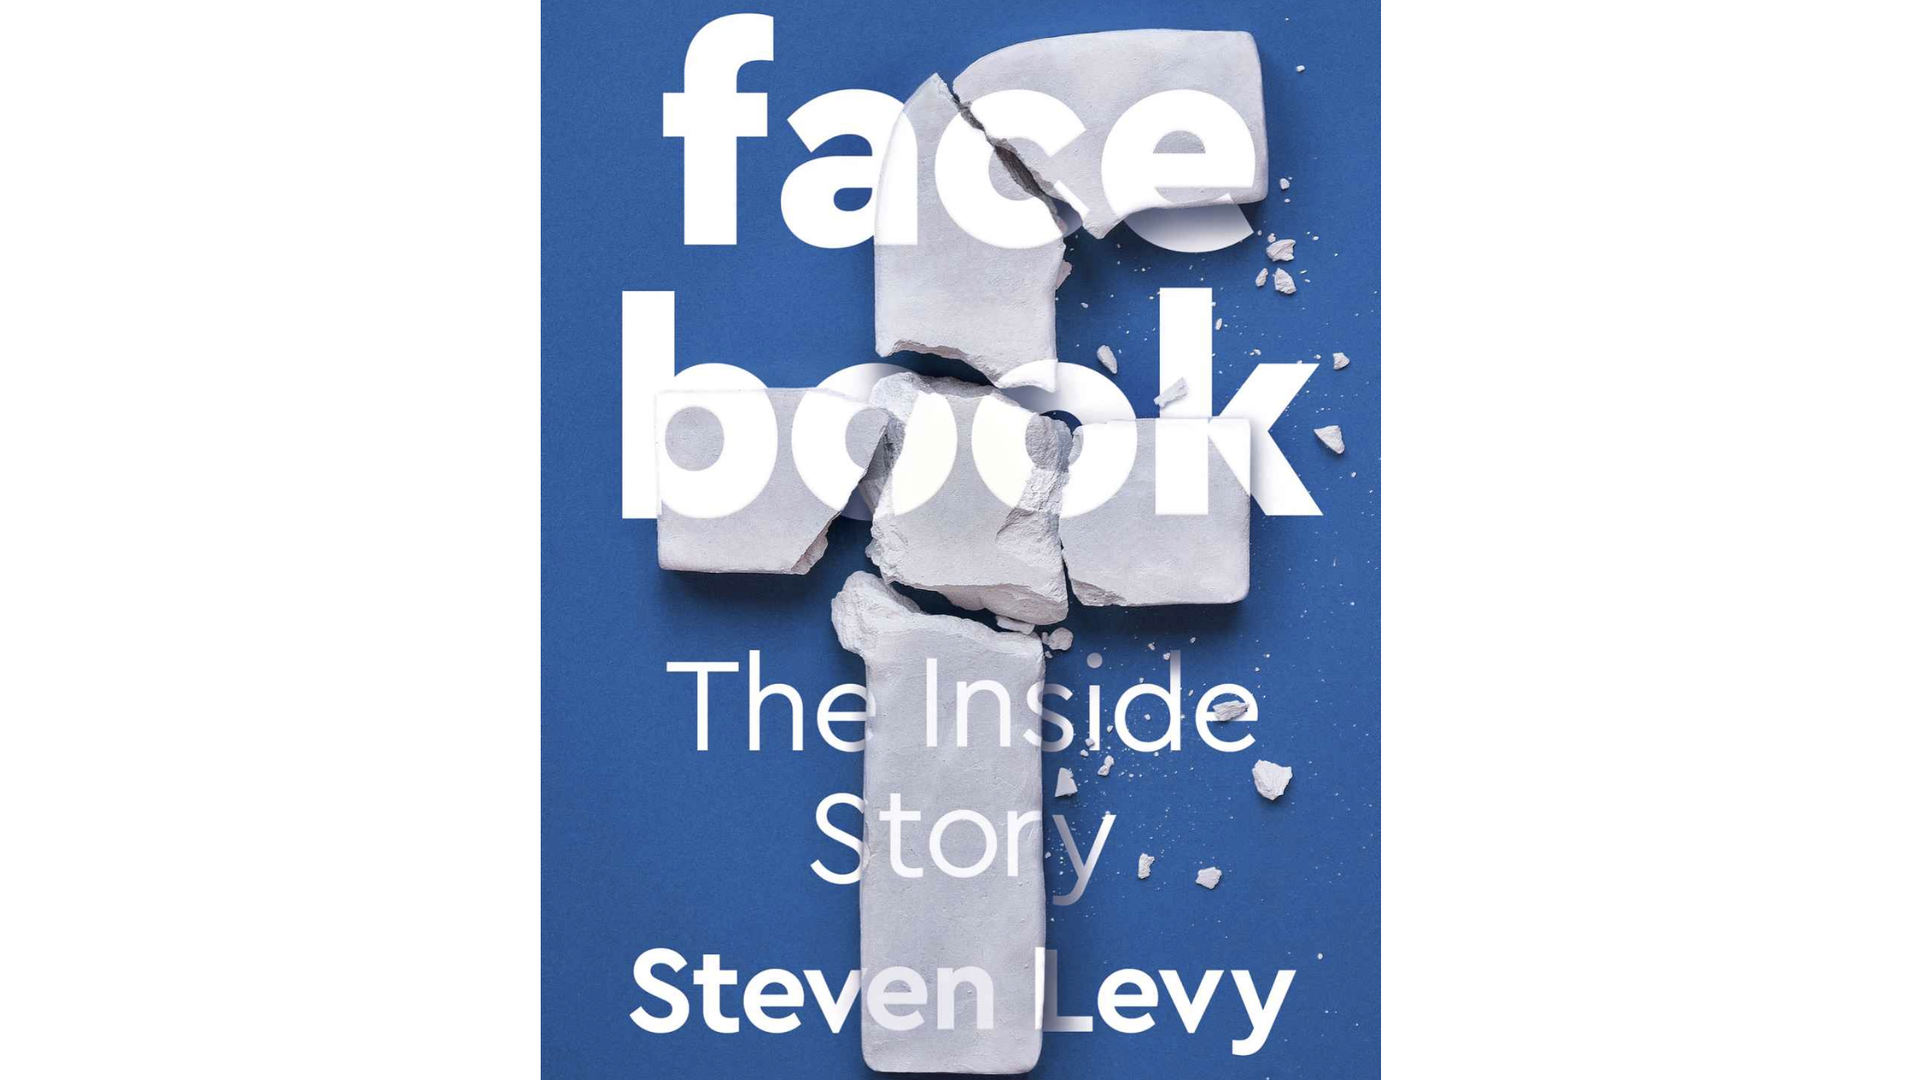 Cover of "Facebook: the Inside Story" by Steve Levy